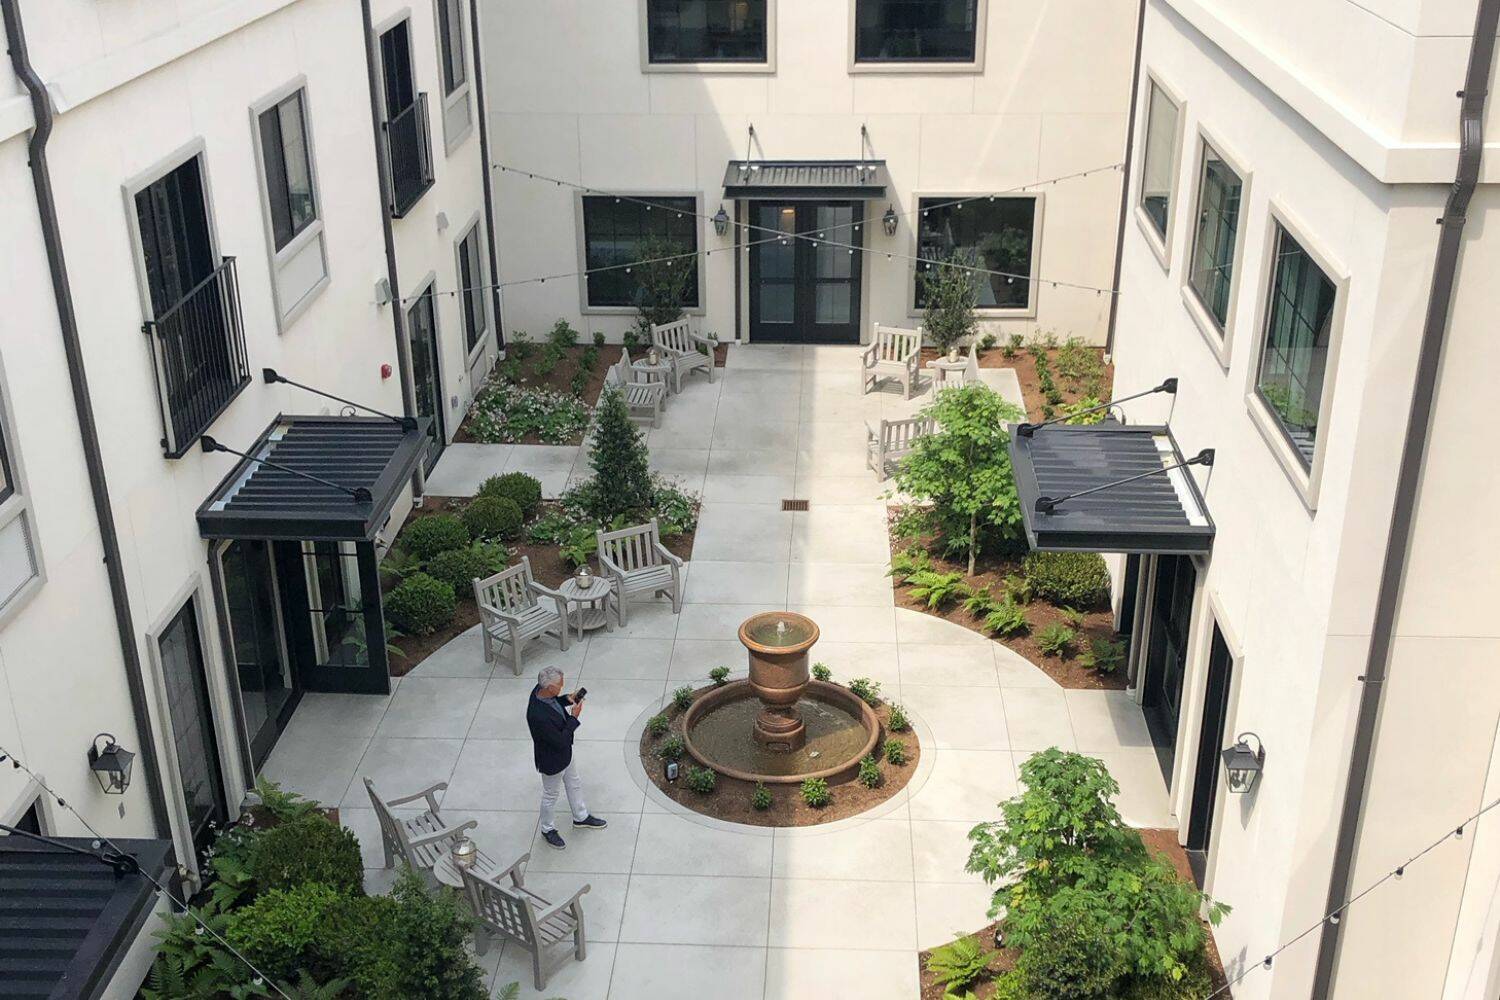 Central courtyard at the Weatherly Inn. Photo by Marie Skoor